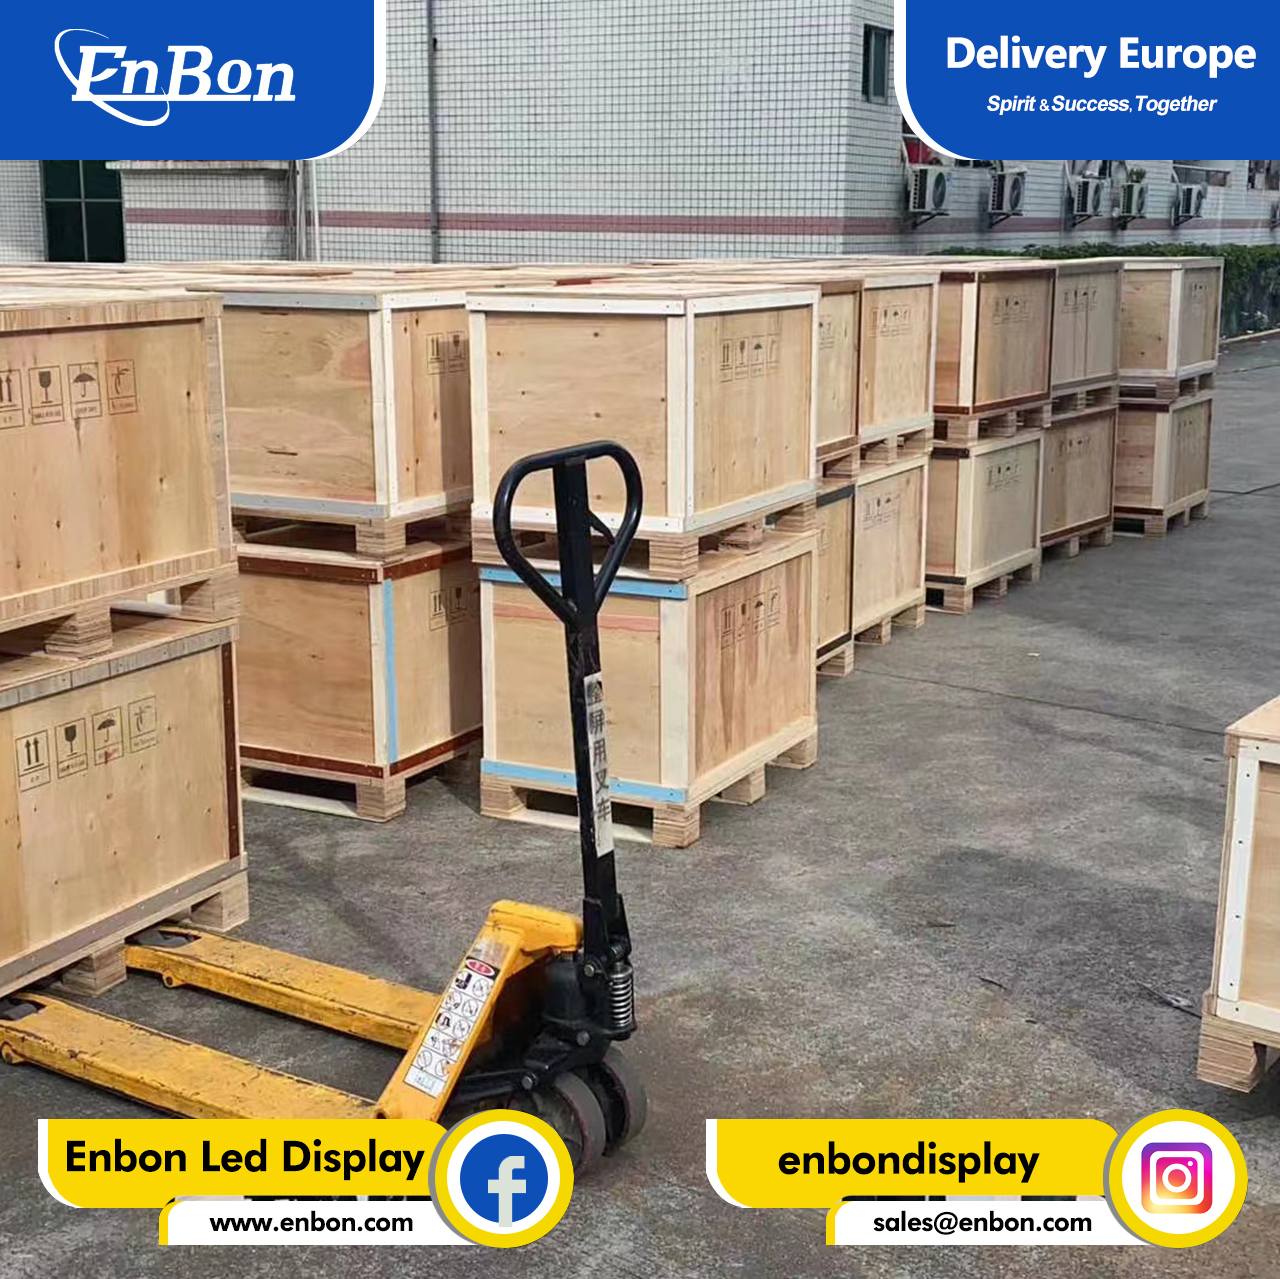 Enbon exports LED screen display to Europe, we are responsible for products and customers |Enbon Comp